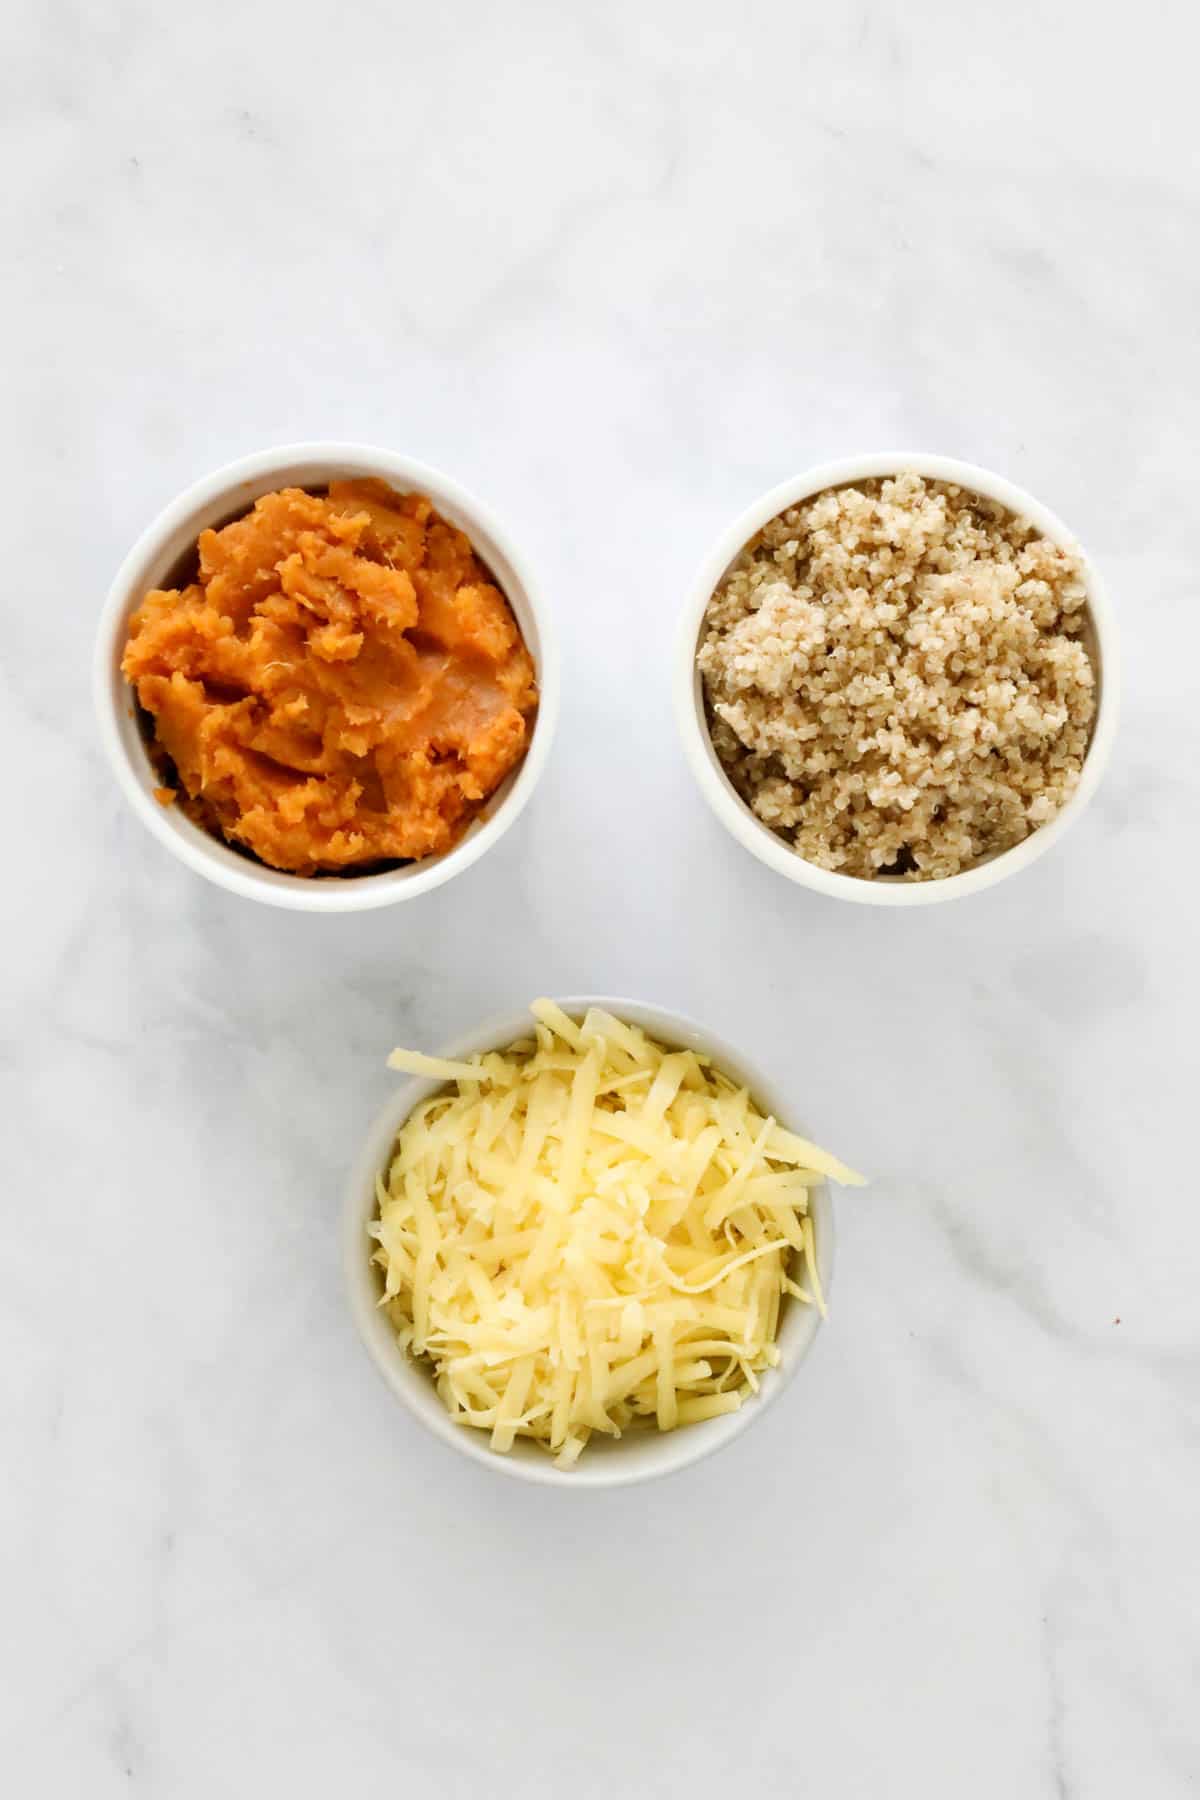 The three ingredients - sweet potato, quinoa and cheese, in individual bowls.